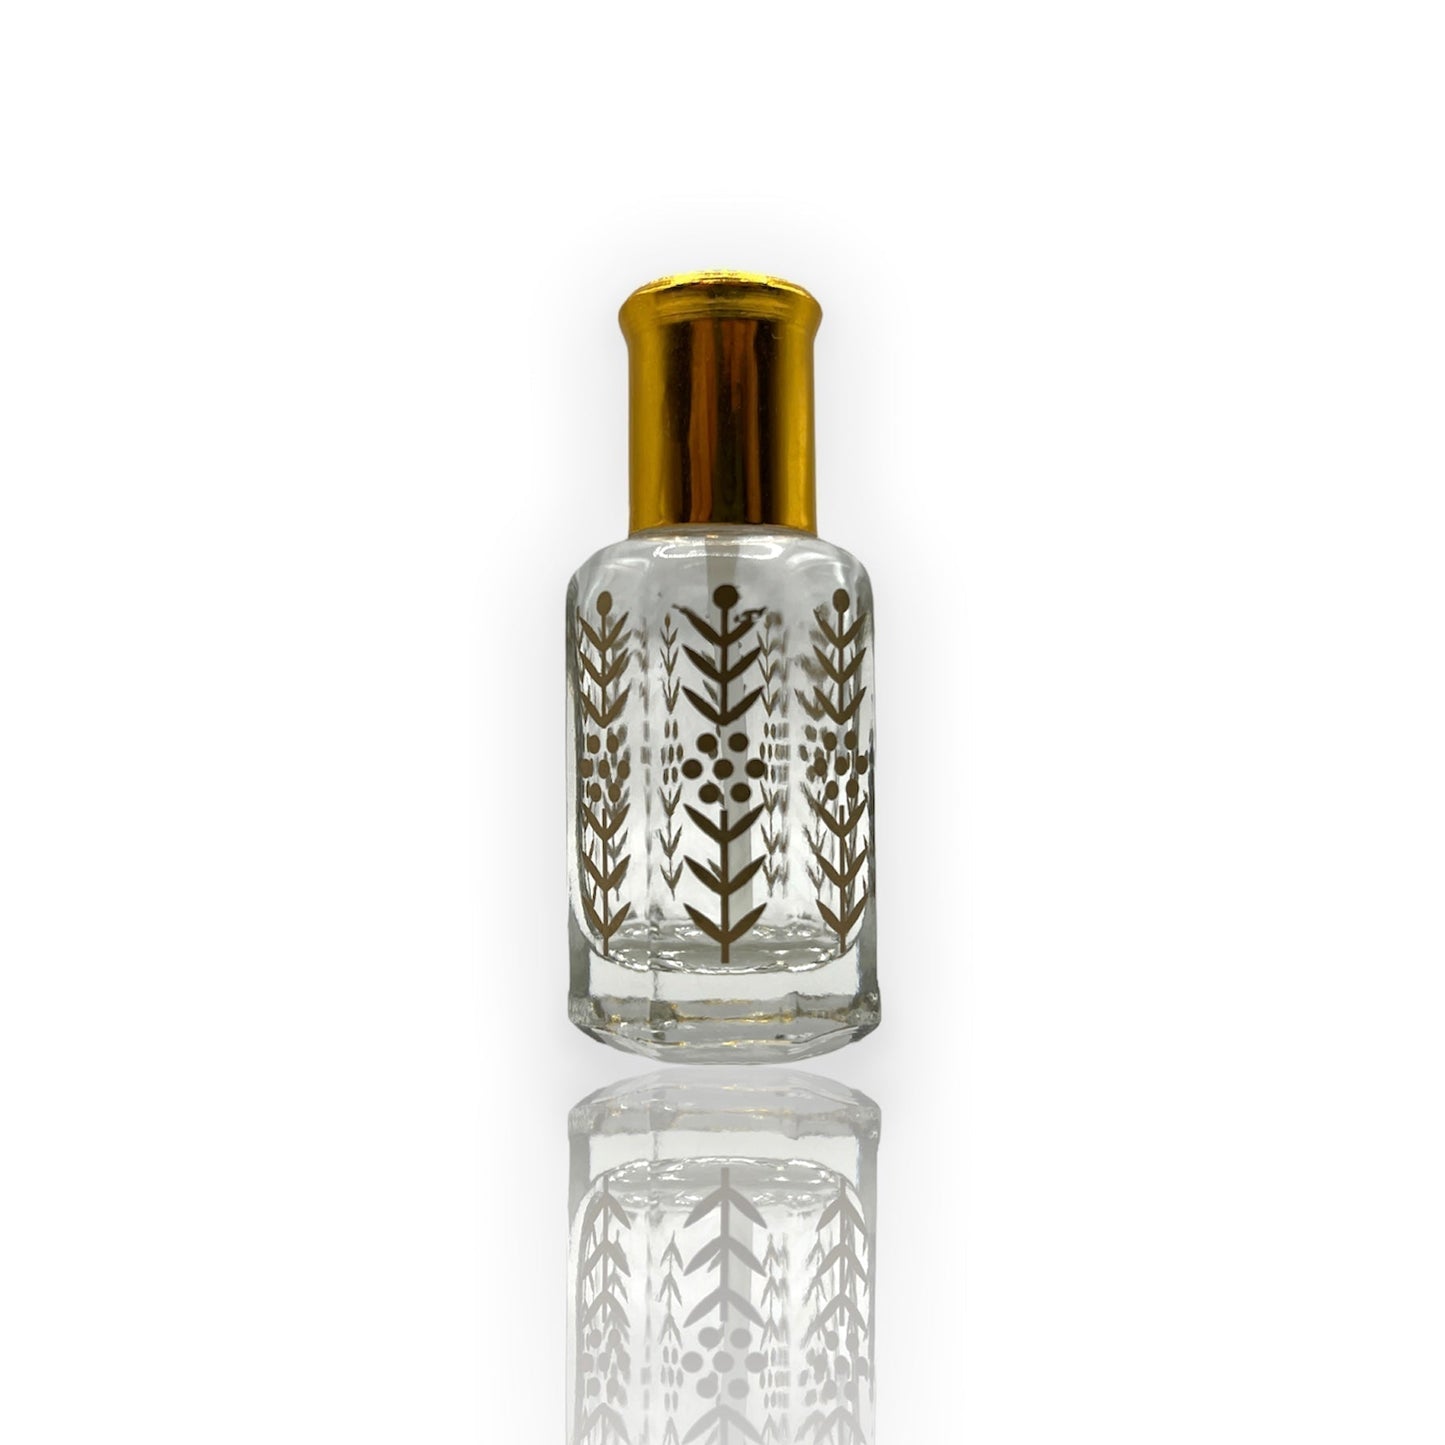 M-13 Oil Perfume *Inspired By Eternity